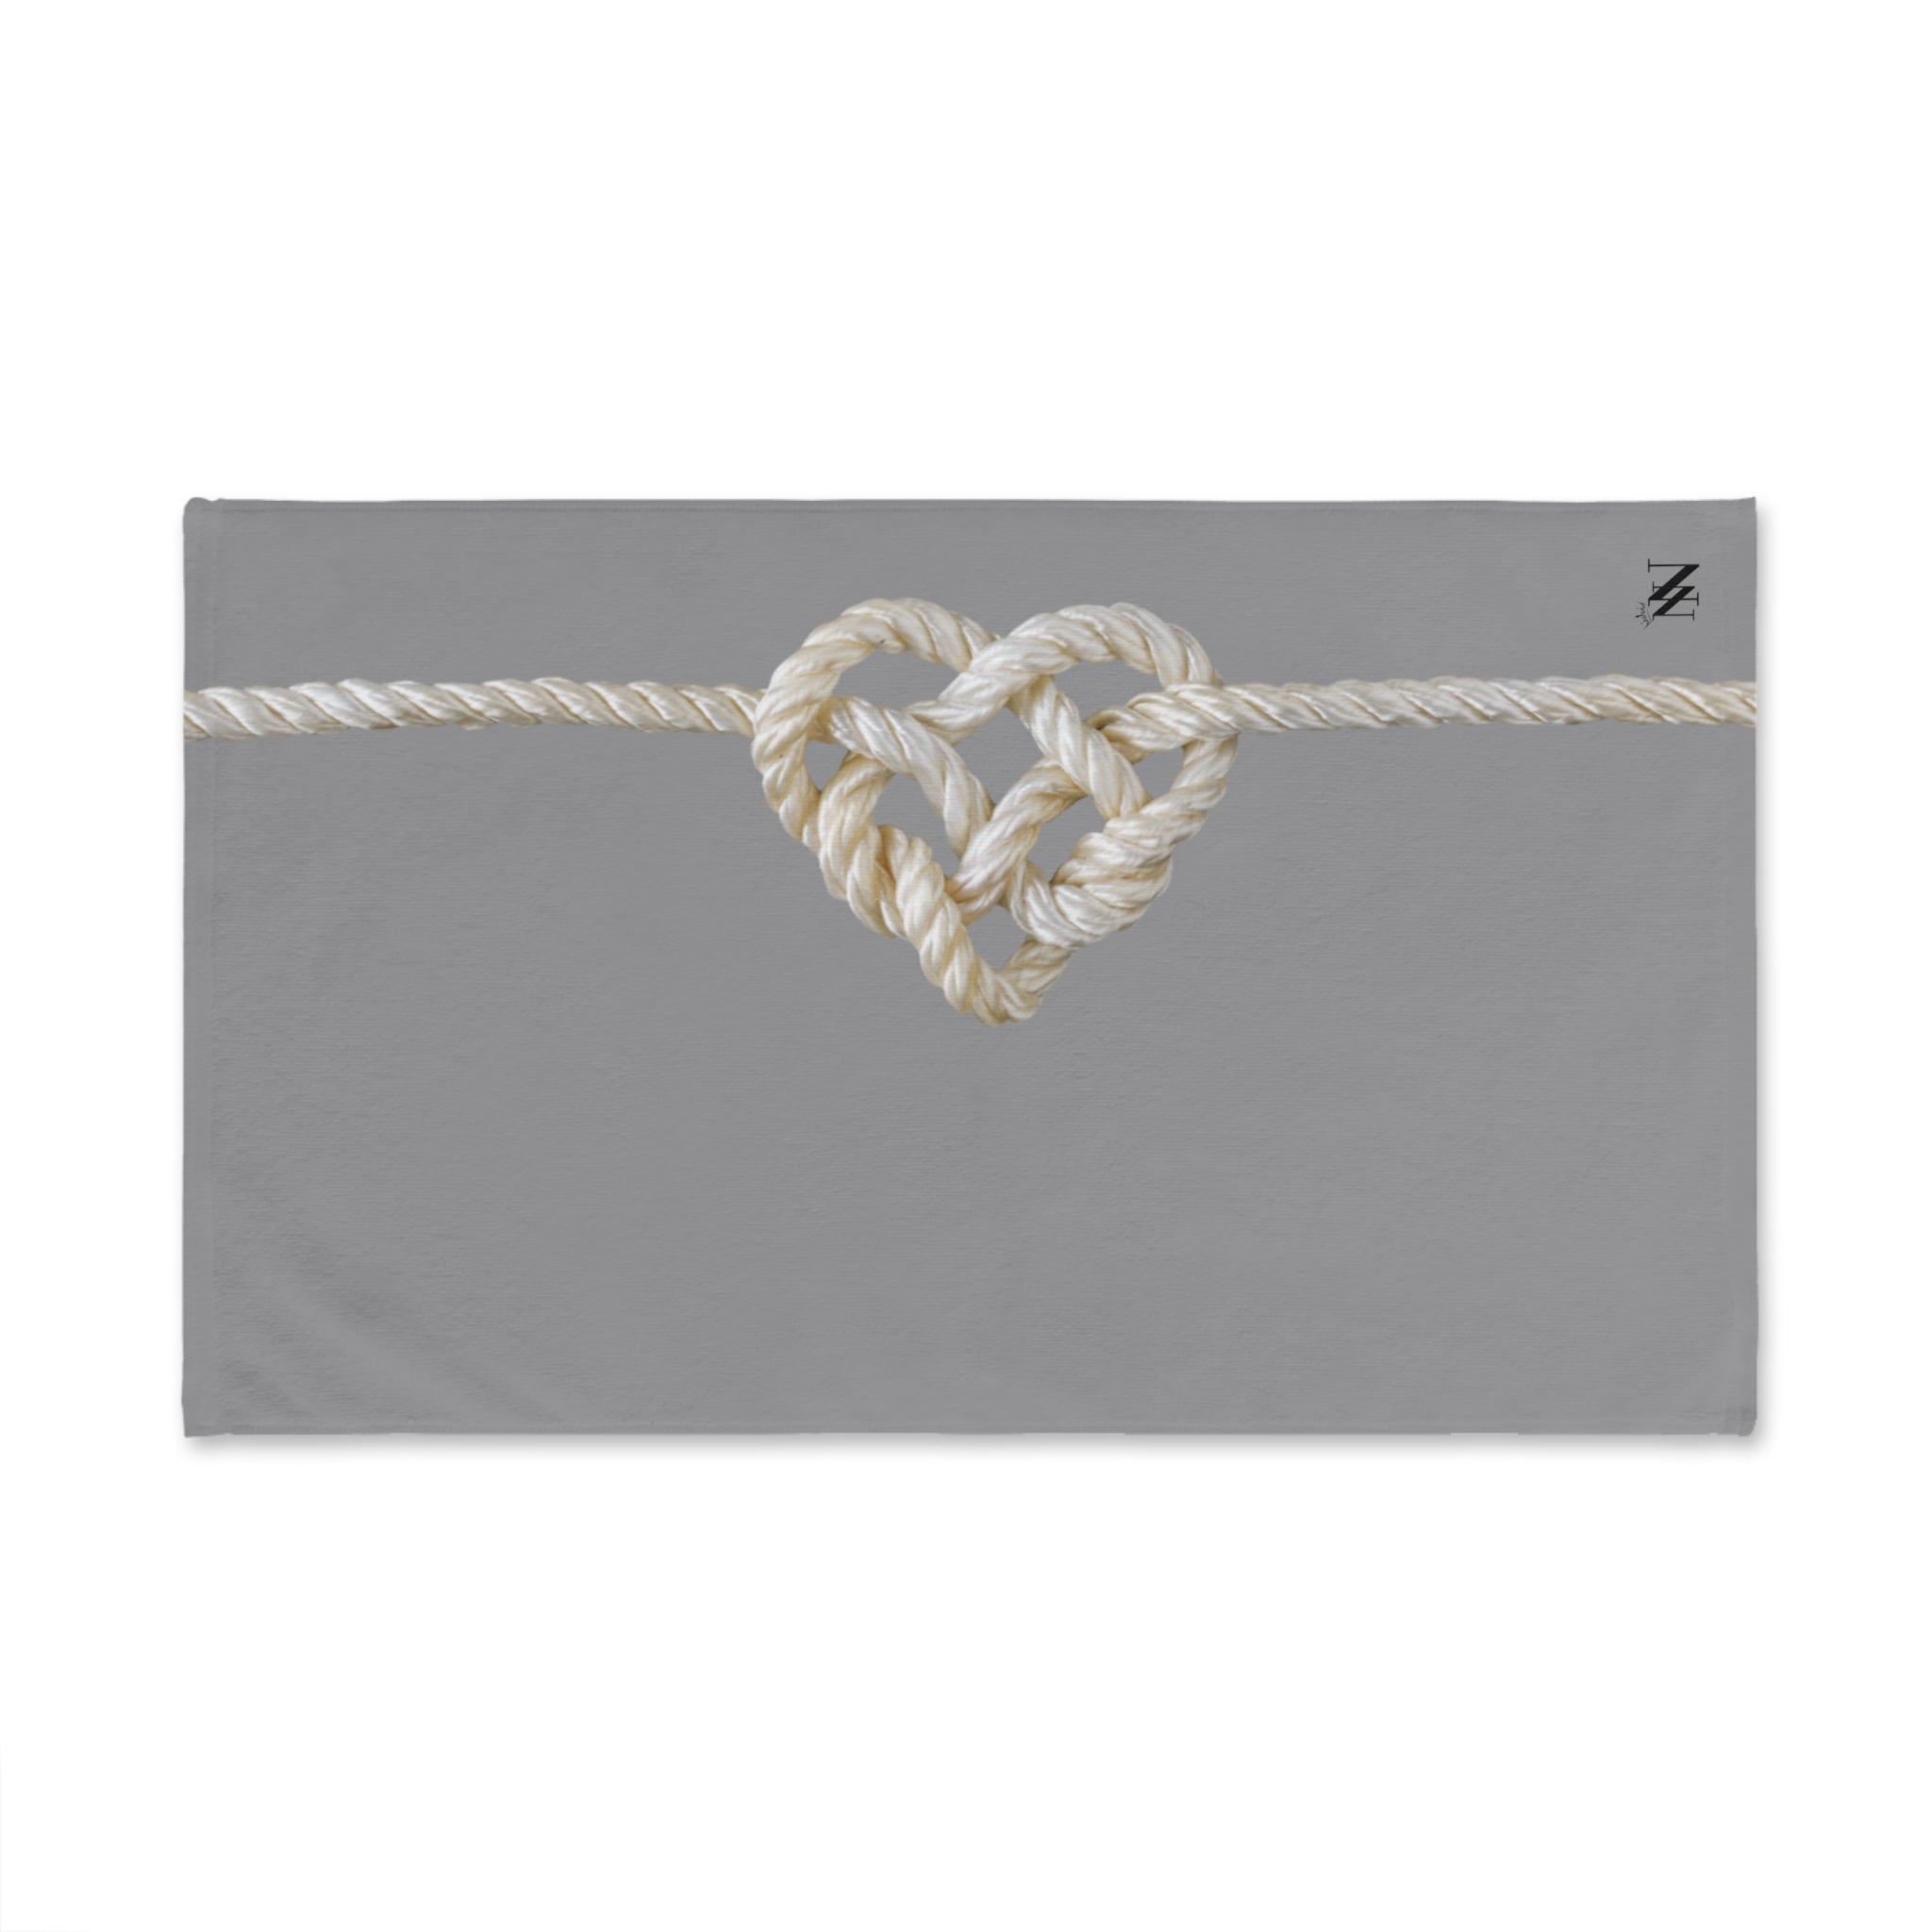 Heart Knot Grey | Anniversary Wedding, Christmas, Valentines Day, Birthday Gifts for Him, Her, Romantic Gifts for Wife, Girlfriend, Couples Gifts for Boyfriend, Husband NECTAR NAPKINS